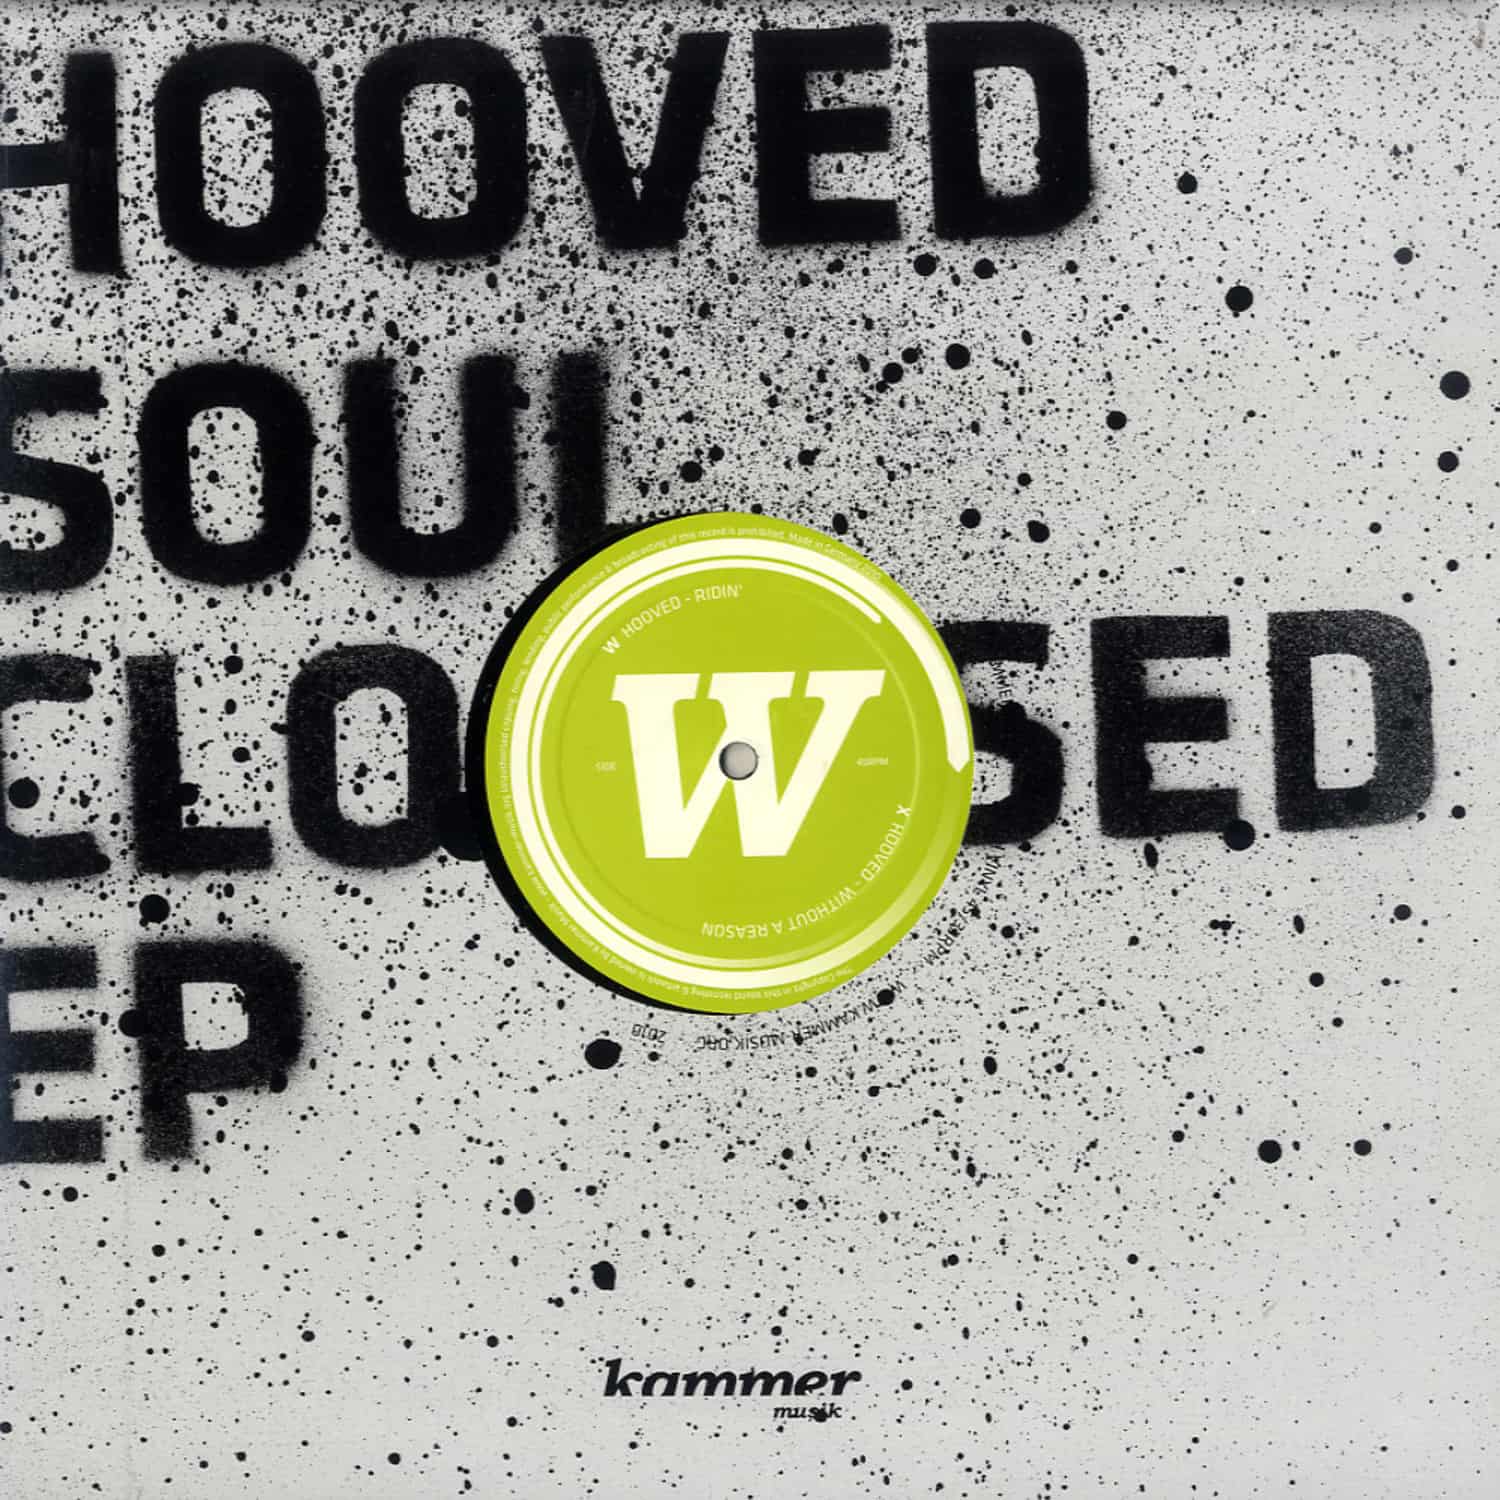 Hooved - SOUL CLOSED EP